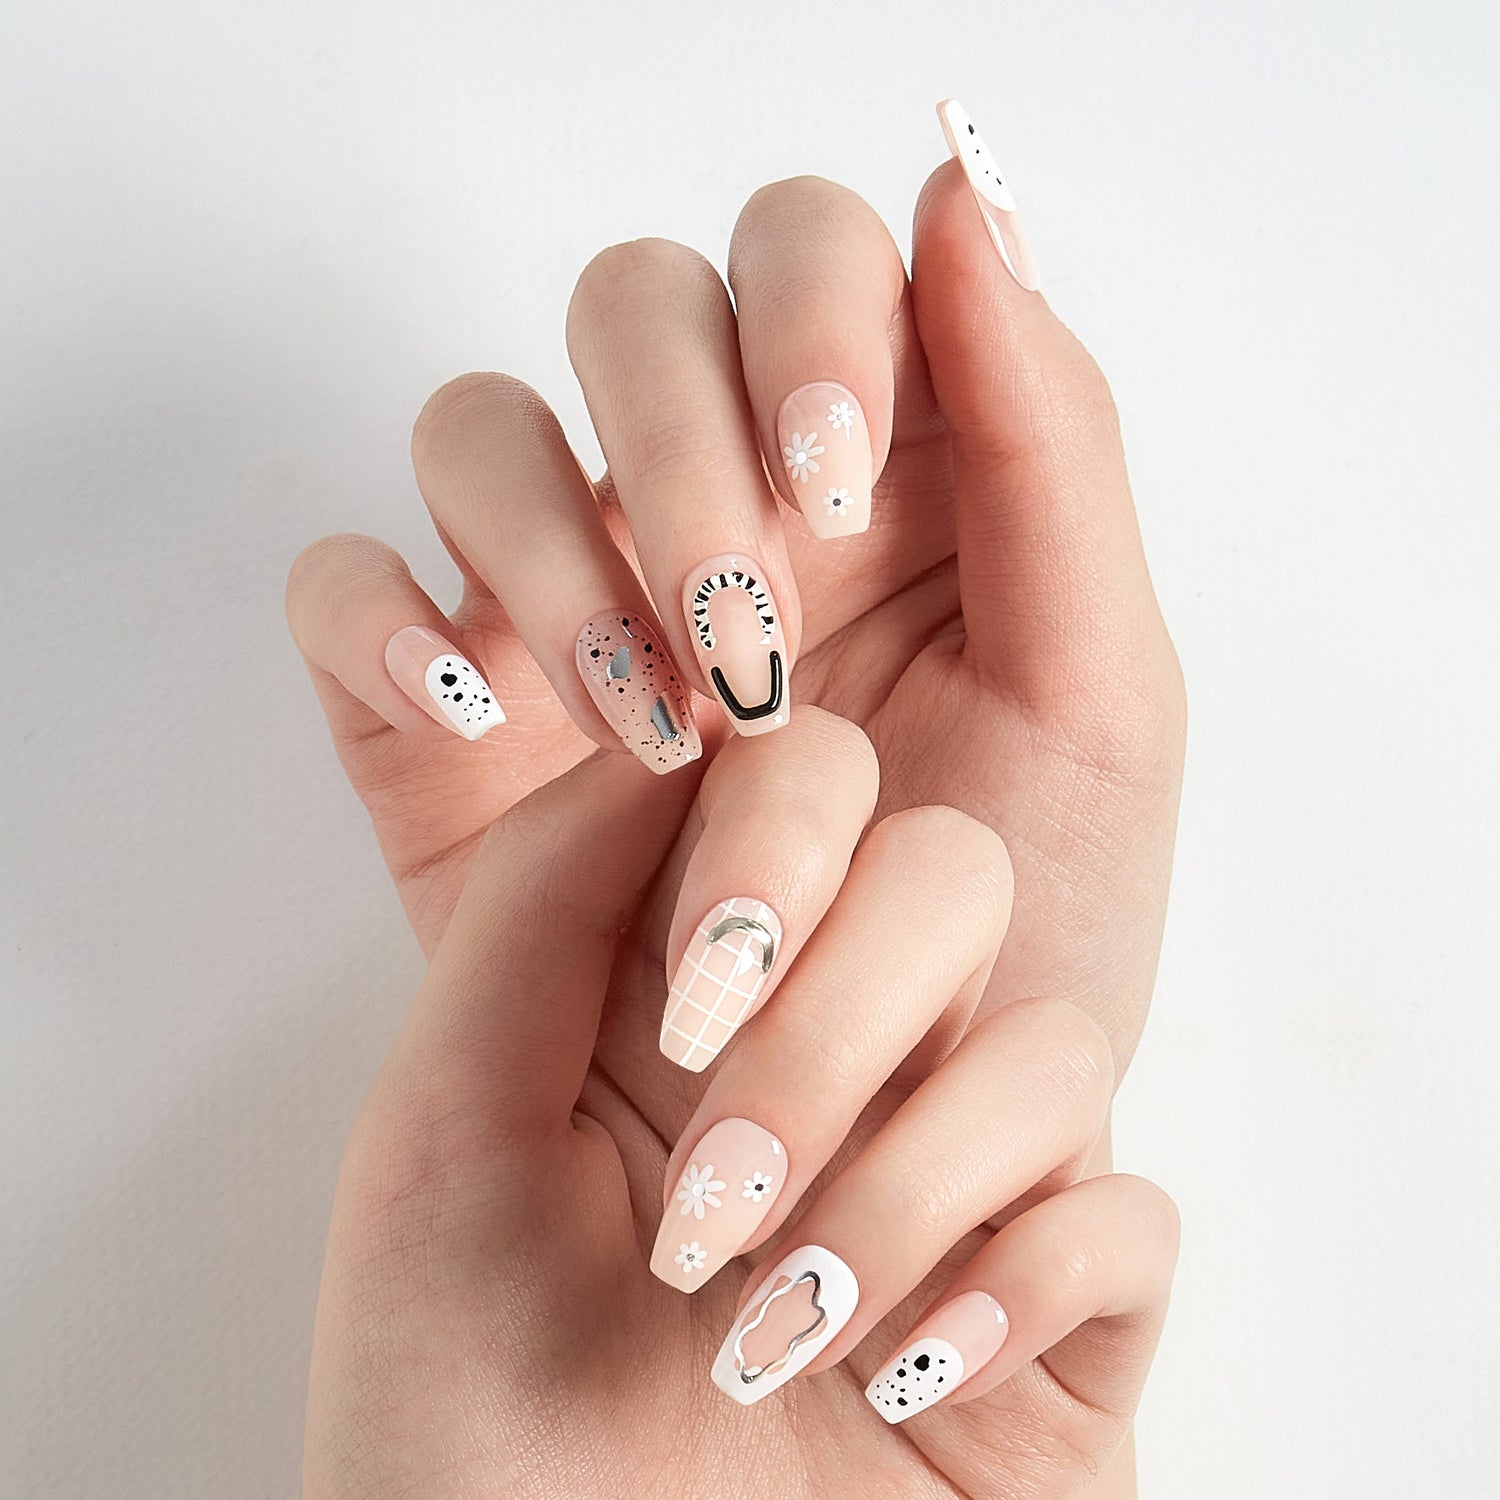 Long length, coffin shape, glossy finish sheer nude press-on gel nails featuring 3D abstract art accents.